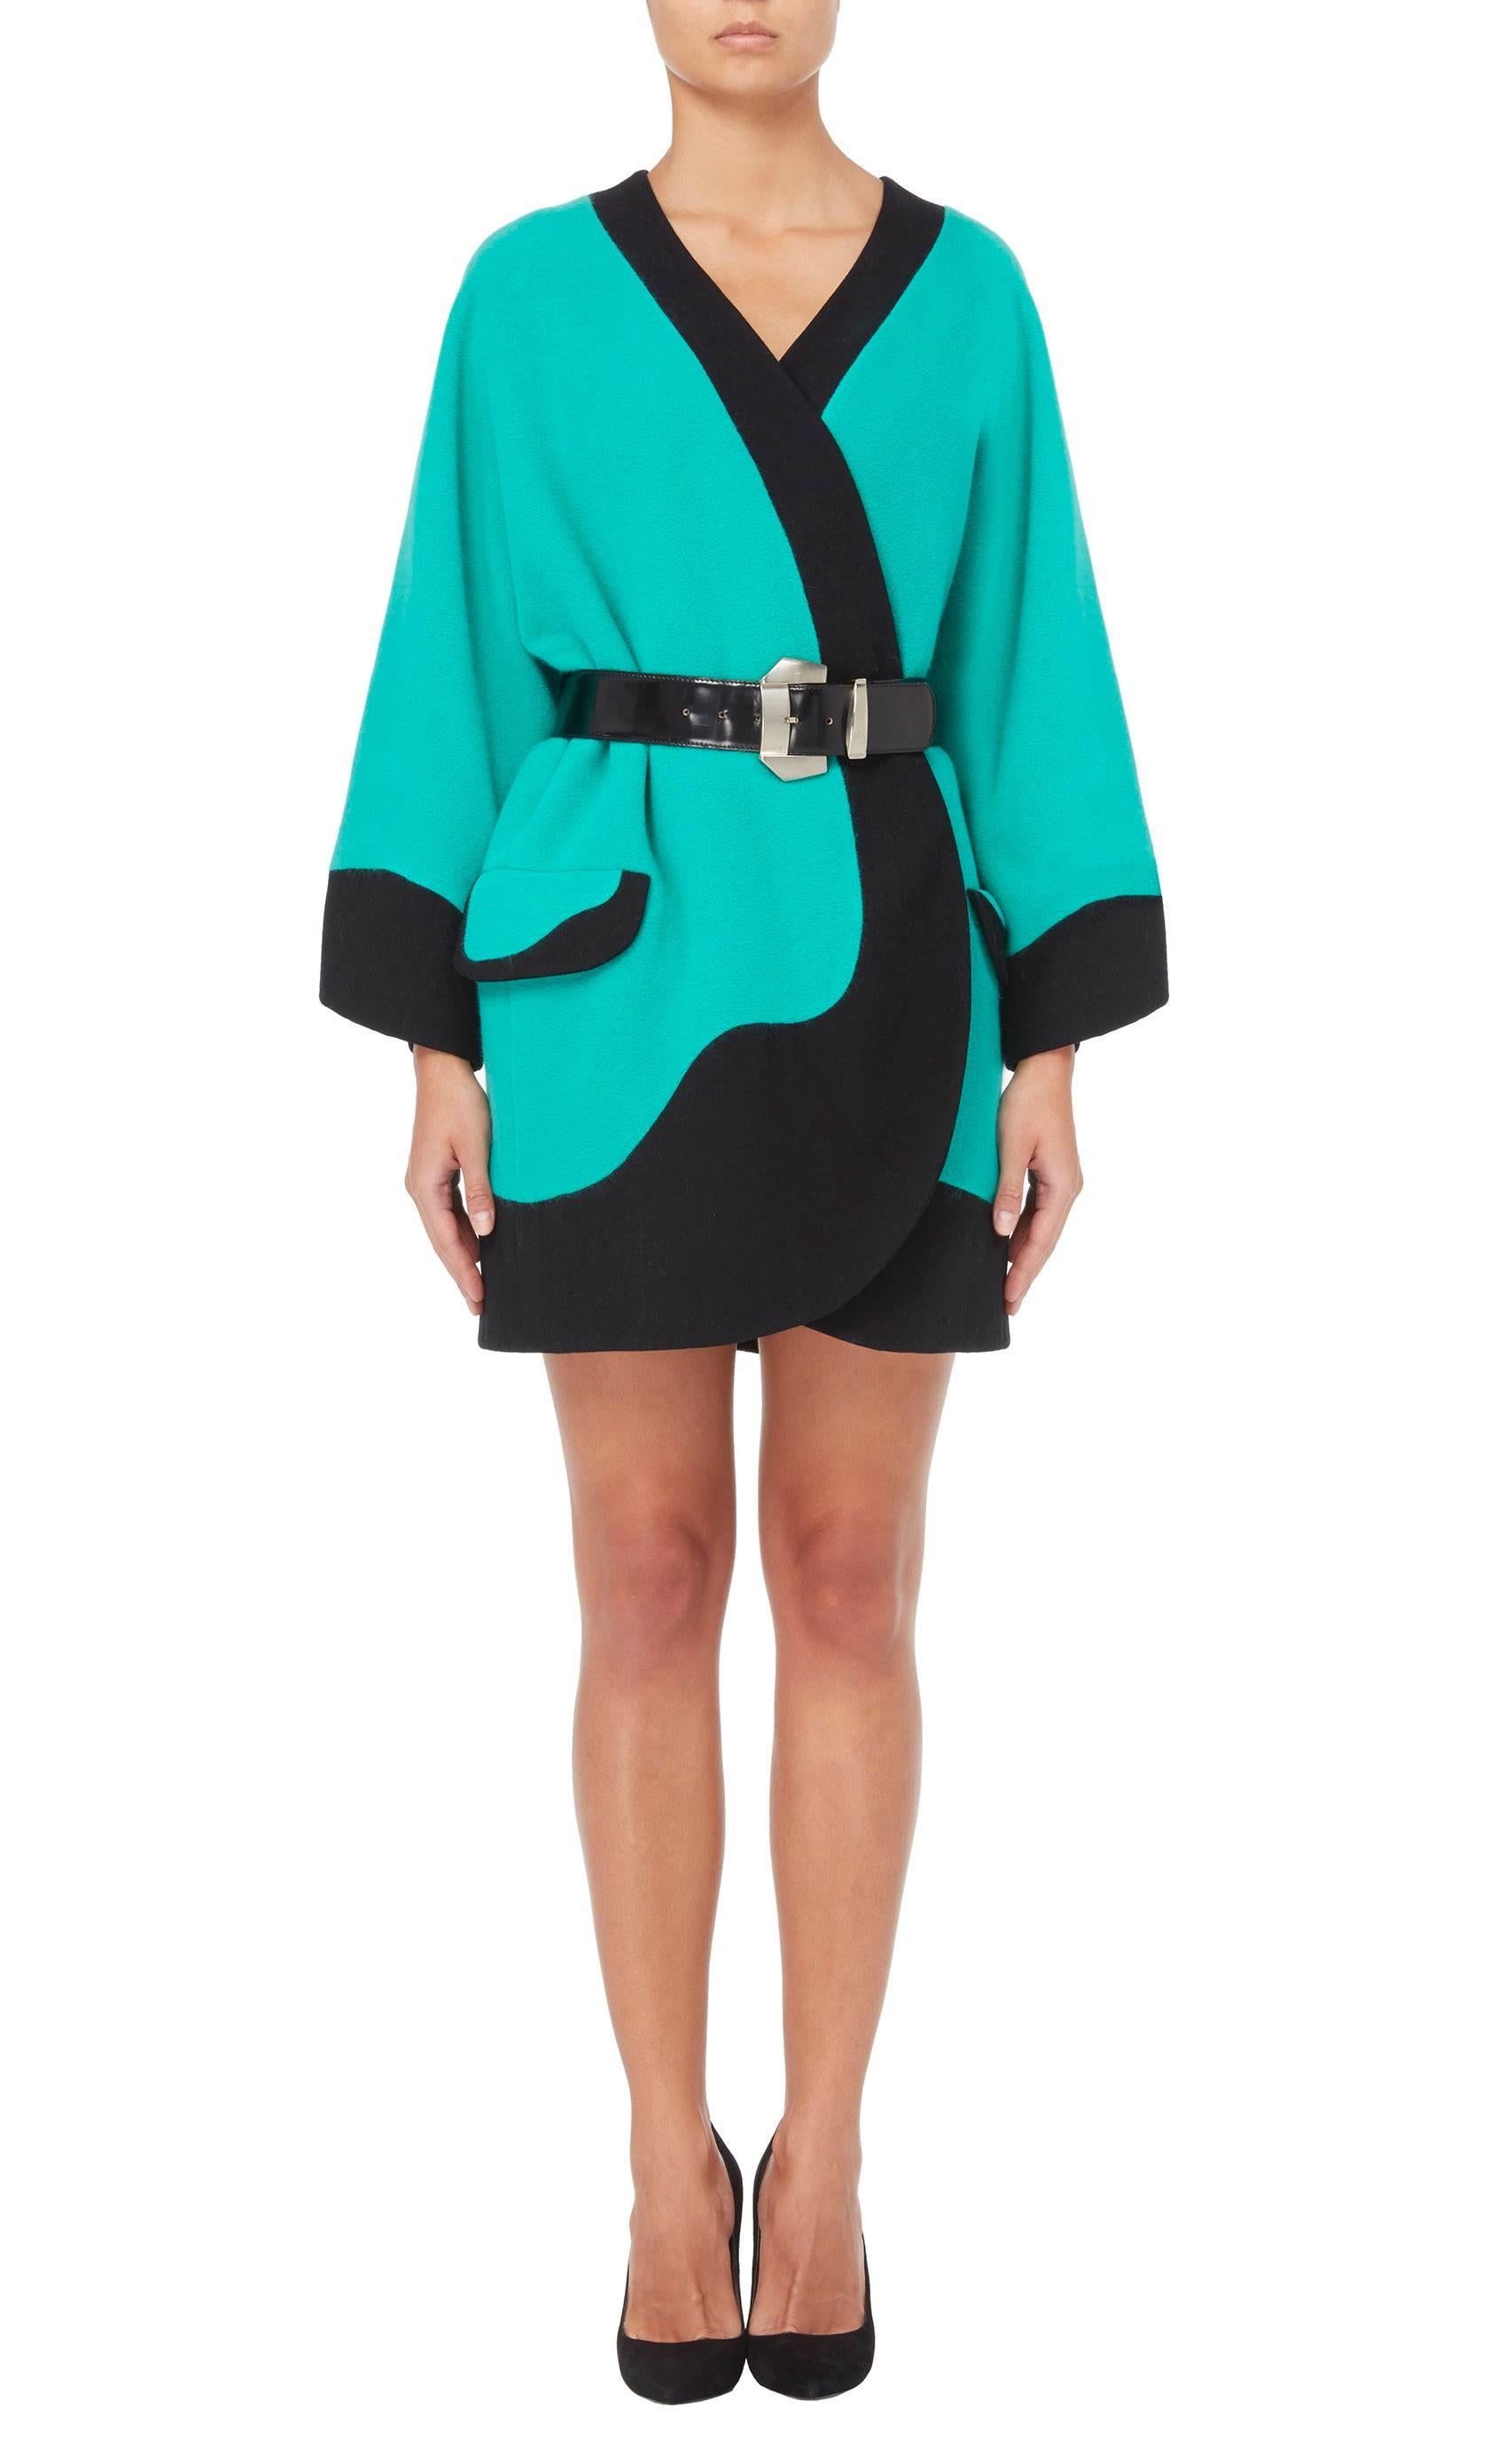 As seen on the Gianni Versace runway, the identical coat was modelled by Cindy Crawford. Constructed in turquoise wool, cashgora and angora mix, the coat features a contrasting black trim and decorative pockets on the hip, while the matching black